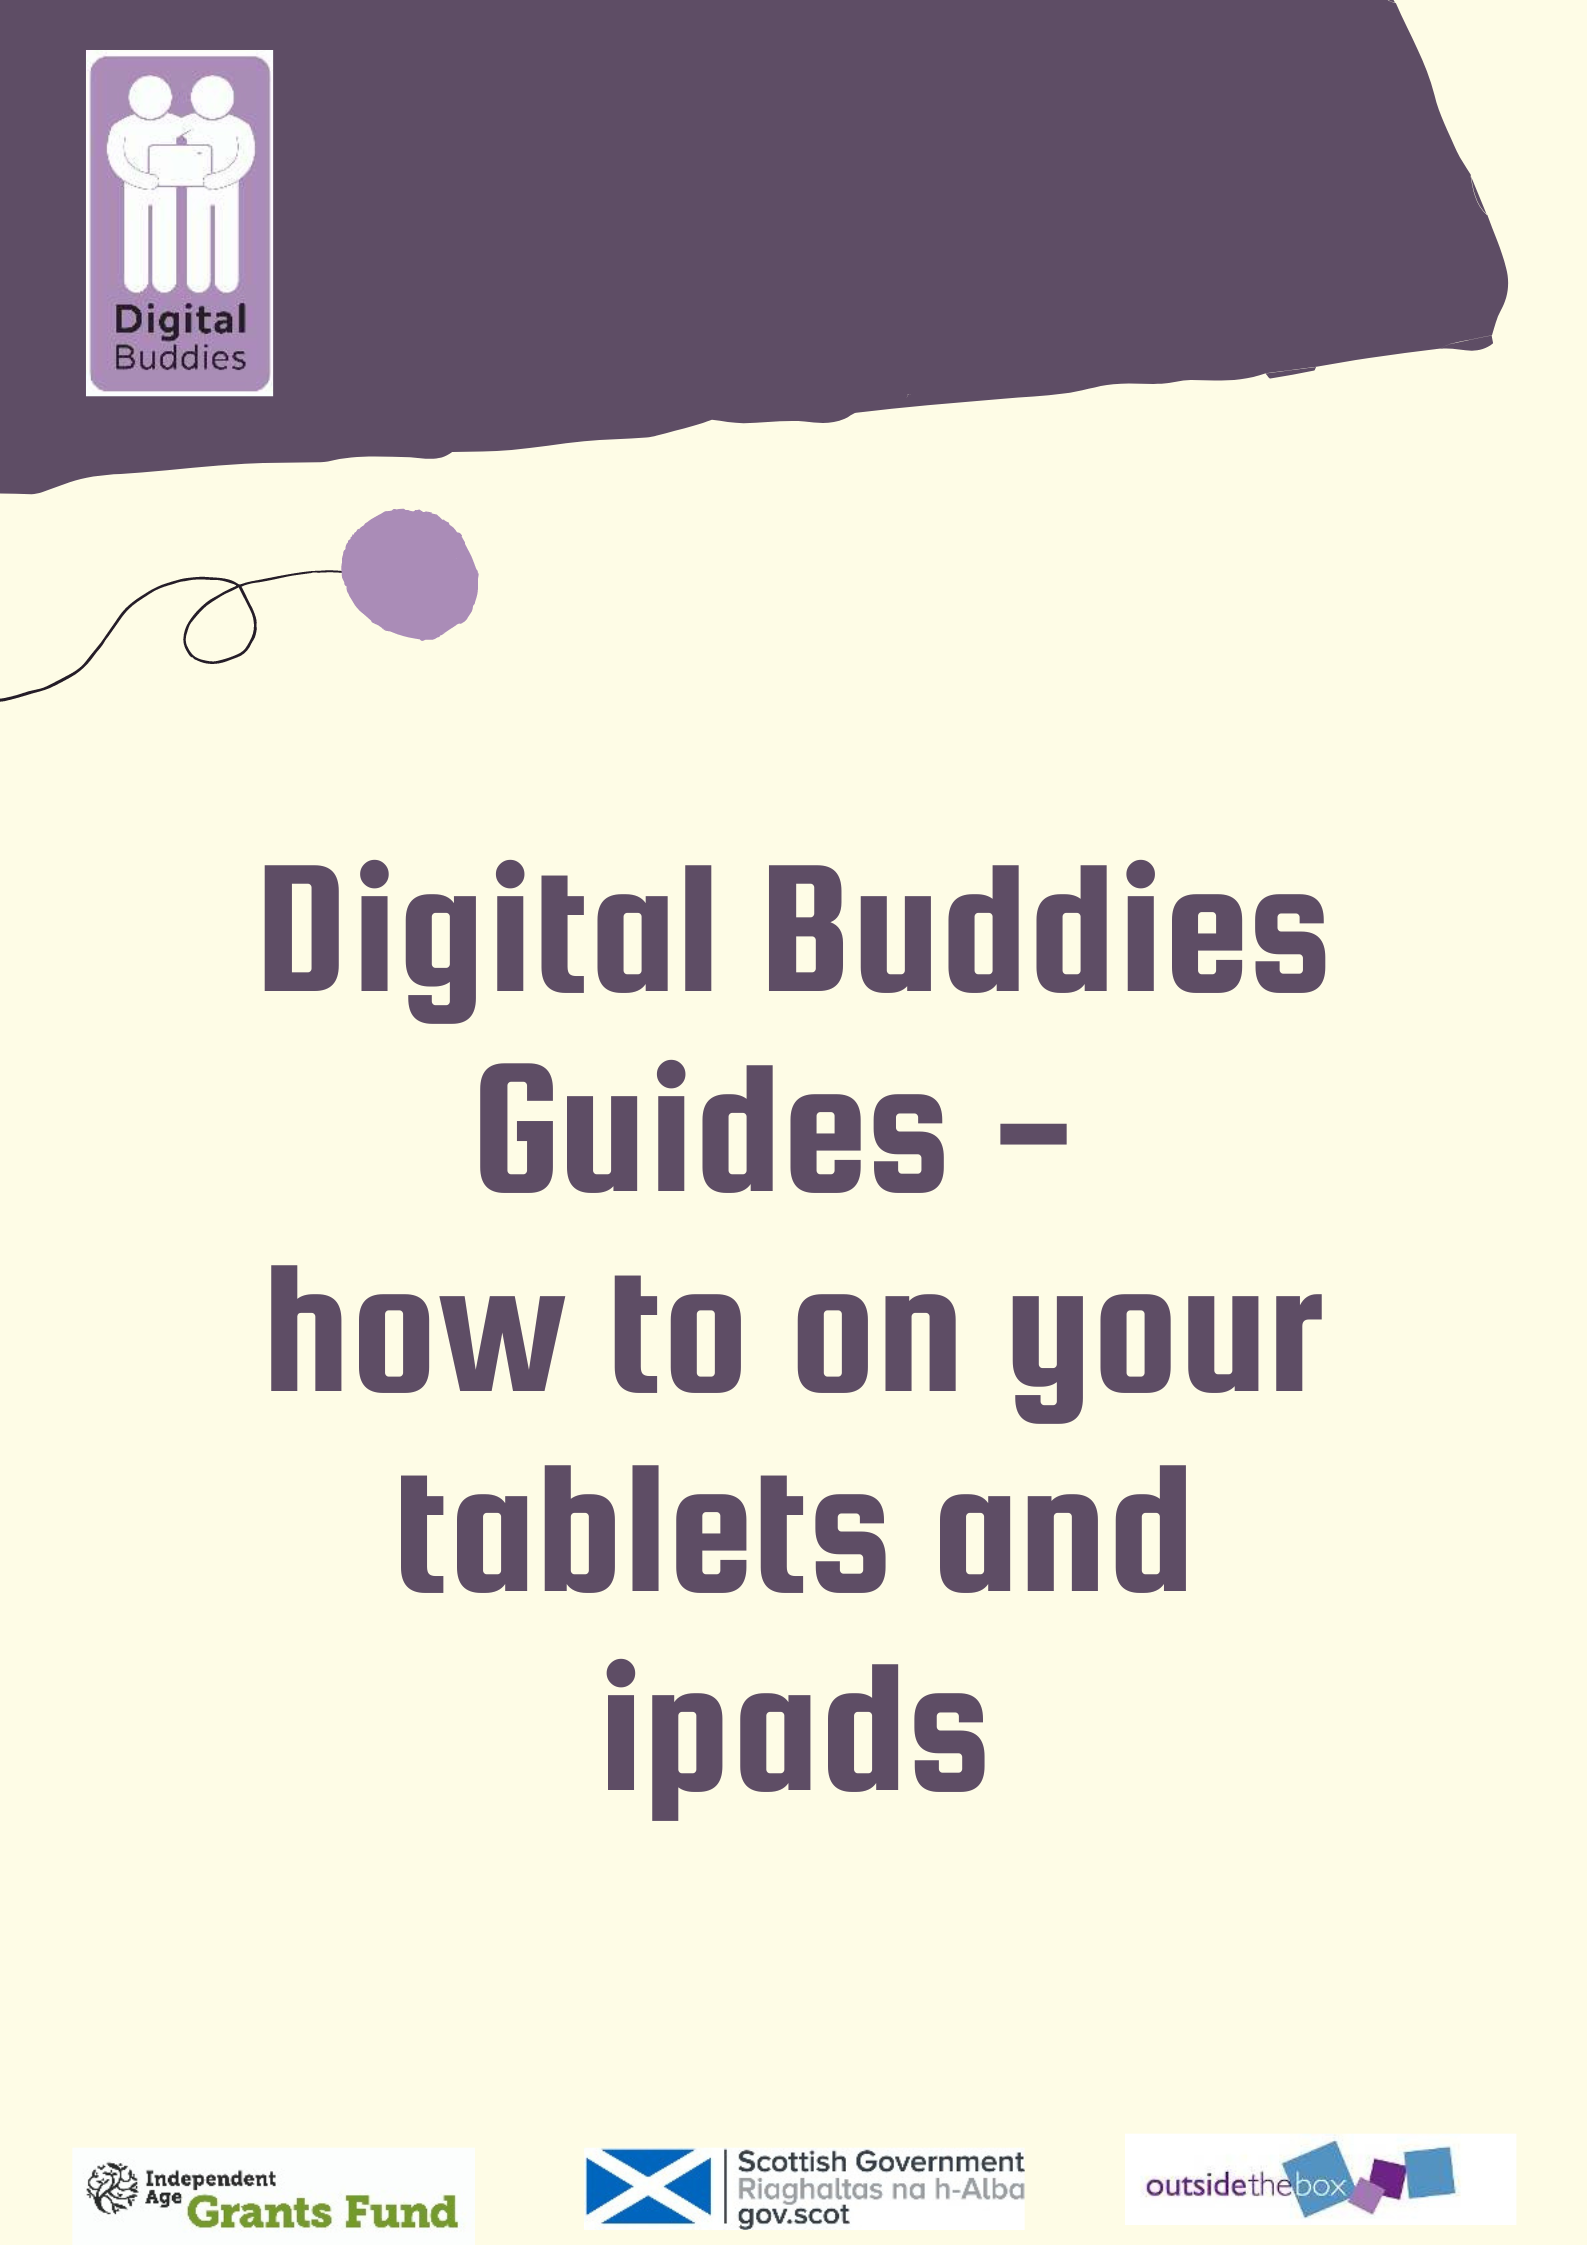 Digital Buddies Guides - how to on your tablets and ipads